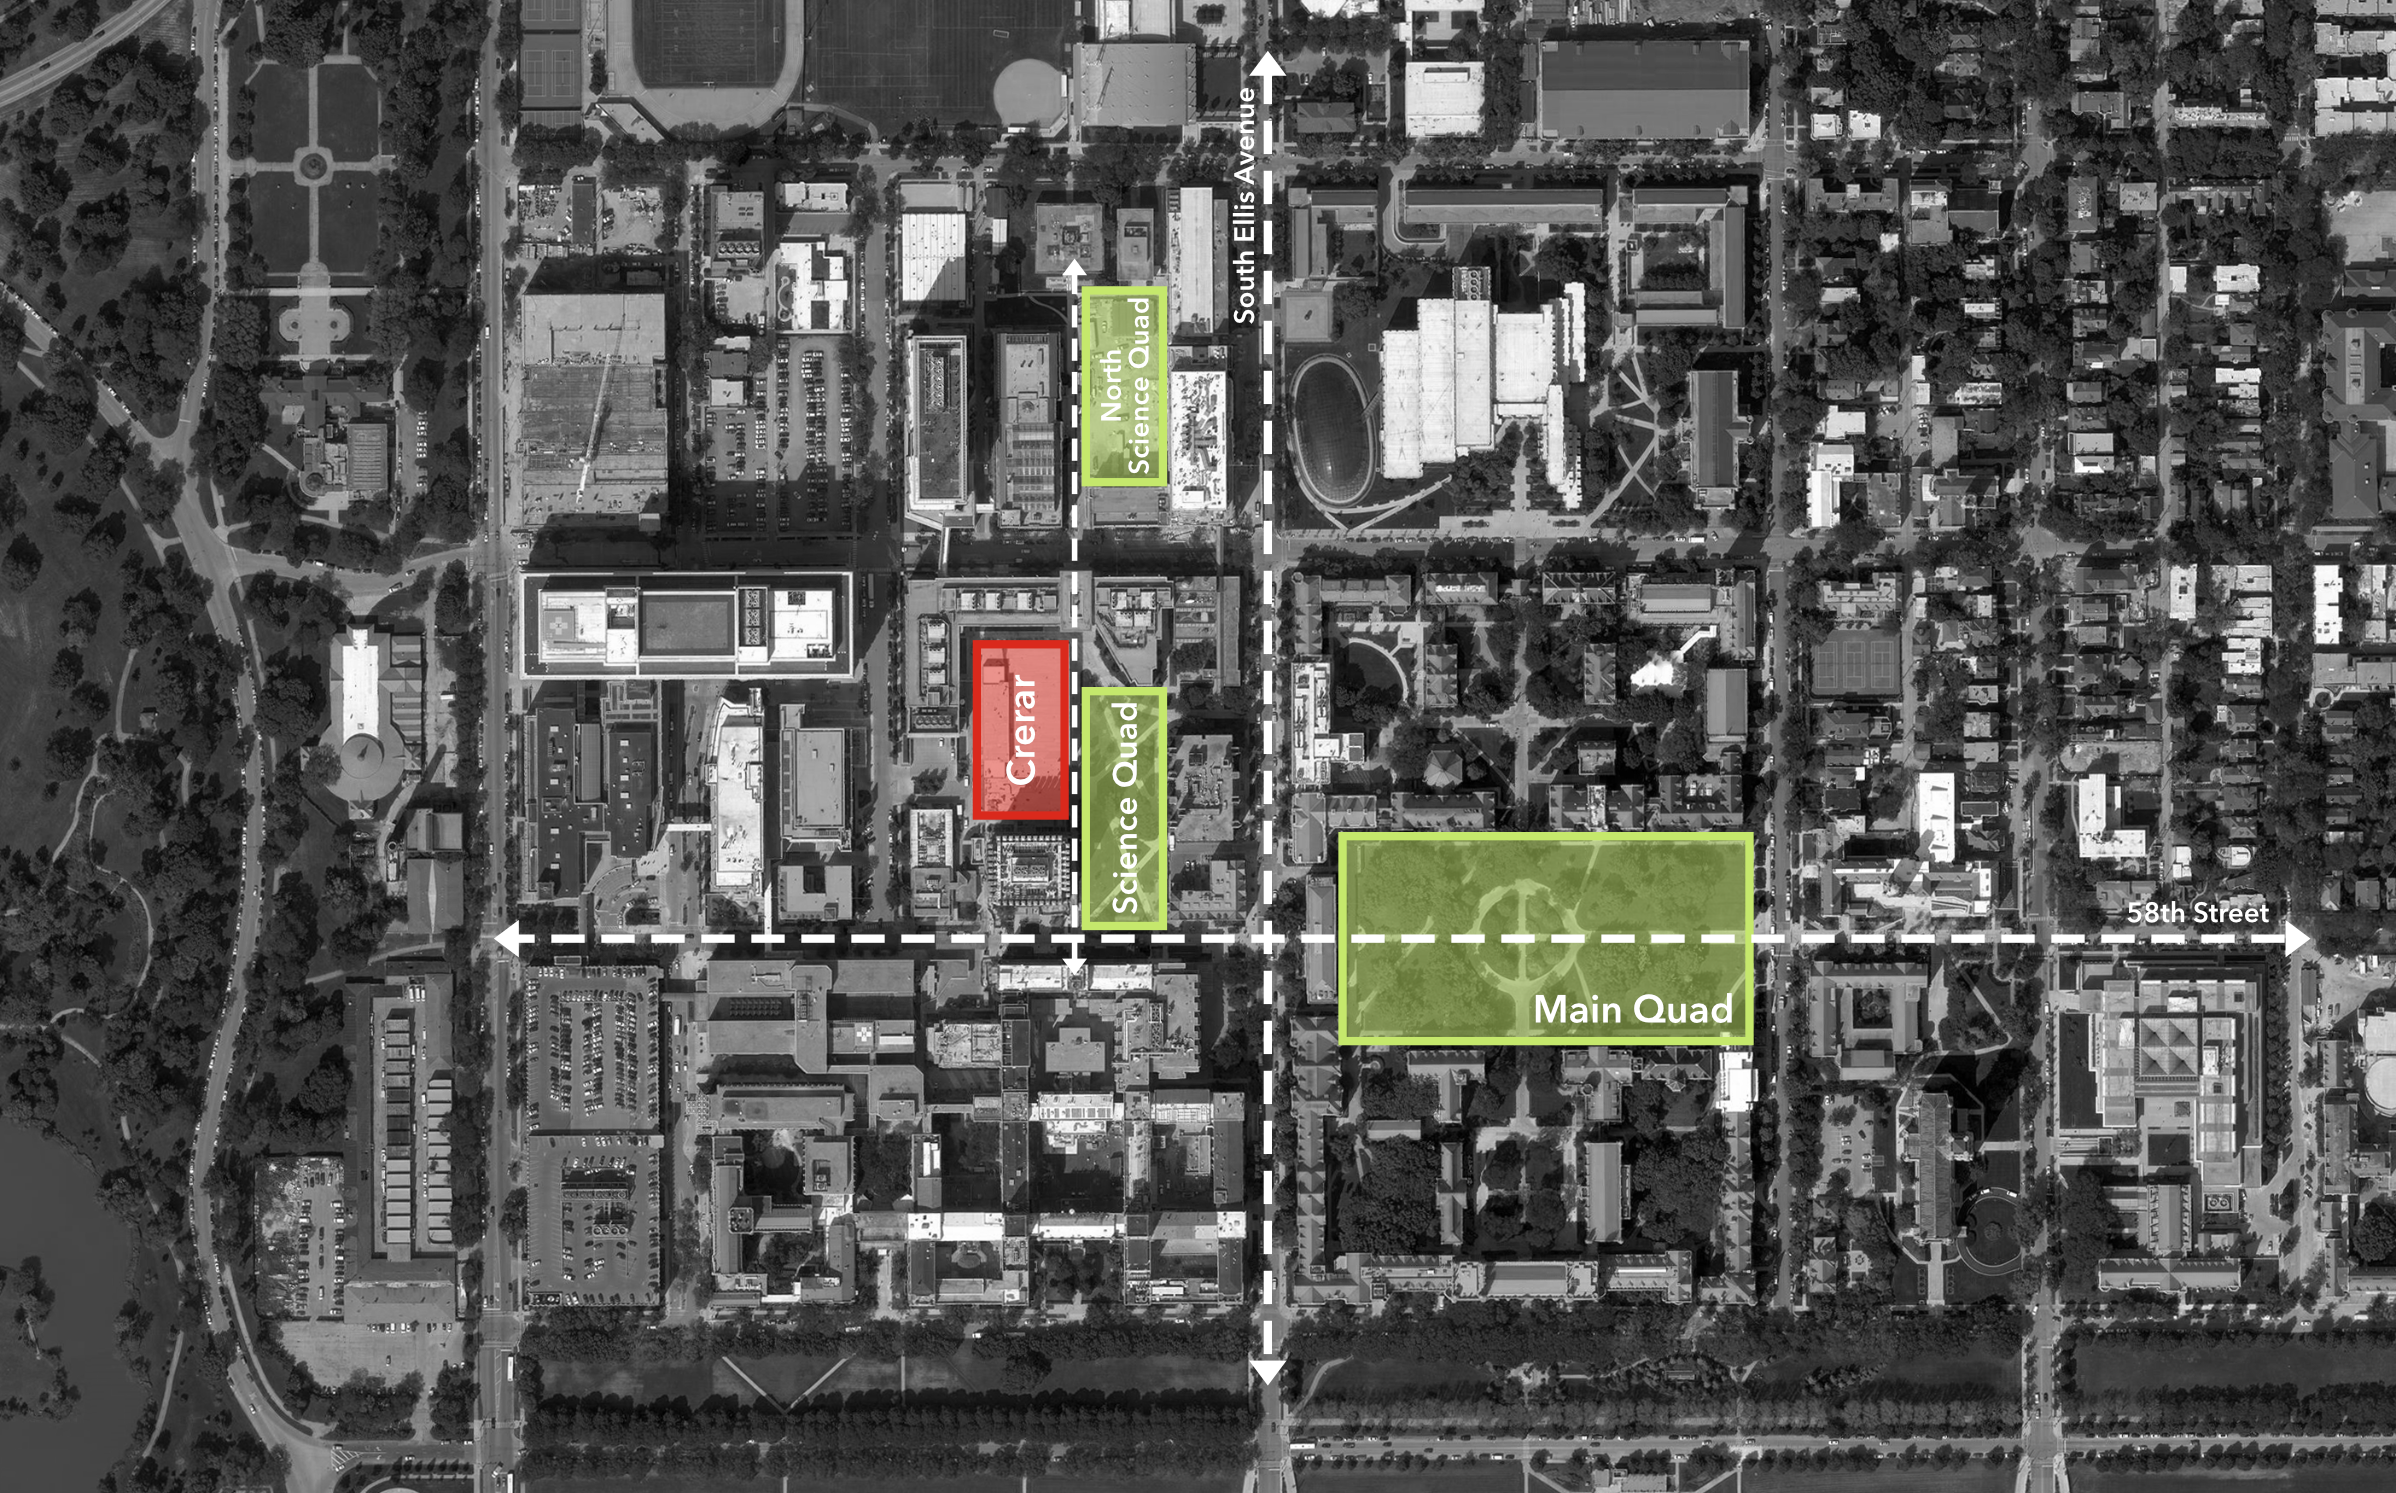 Site plan showing Crerar in relation to major campus green spaces and axes